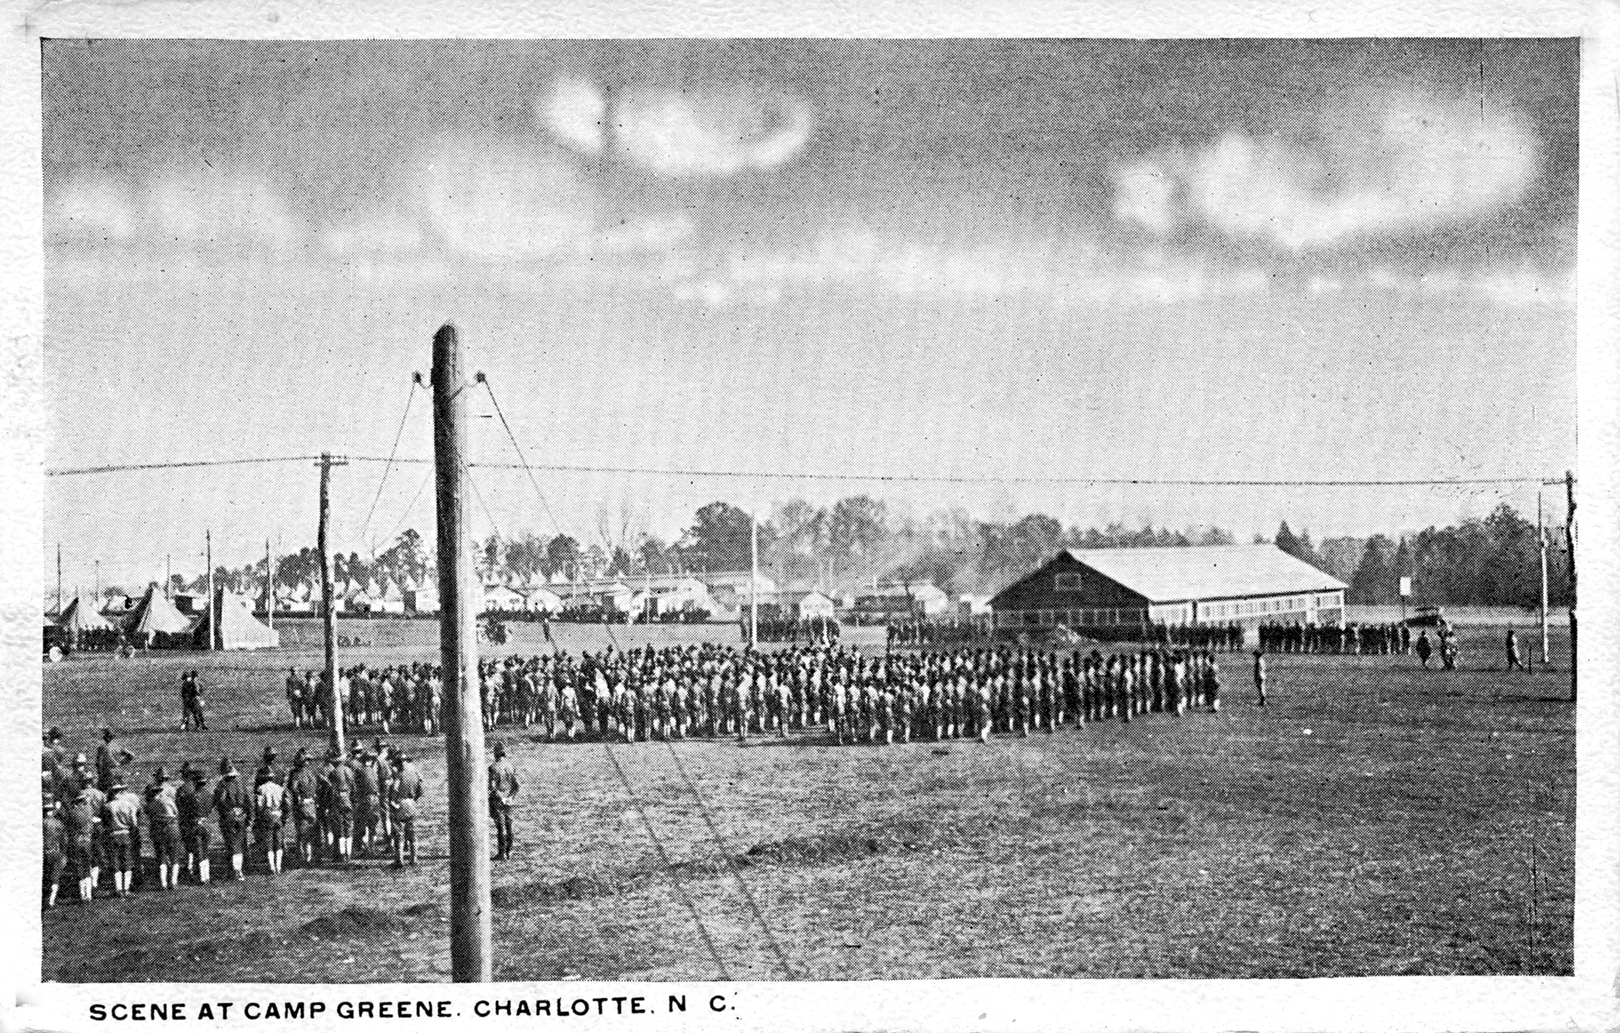 Soldiers on the Drill Field